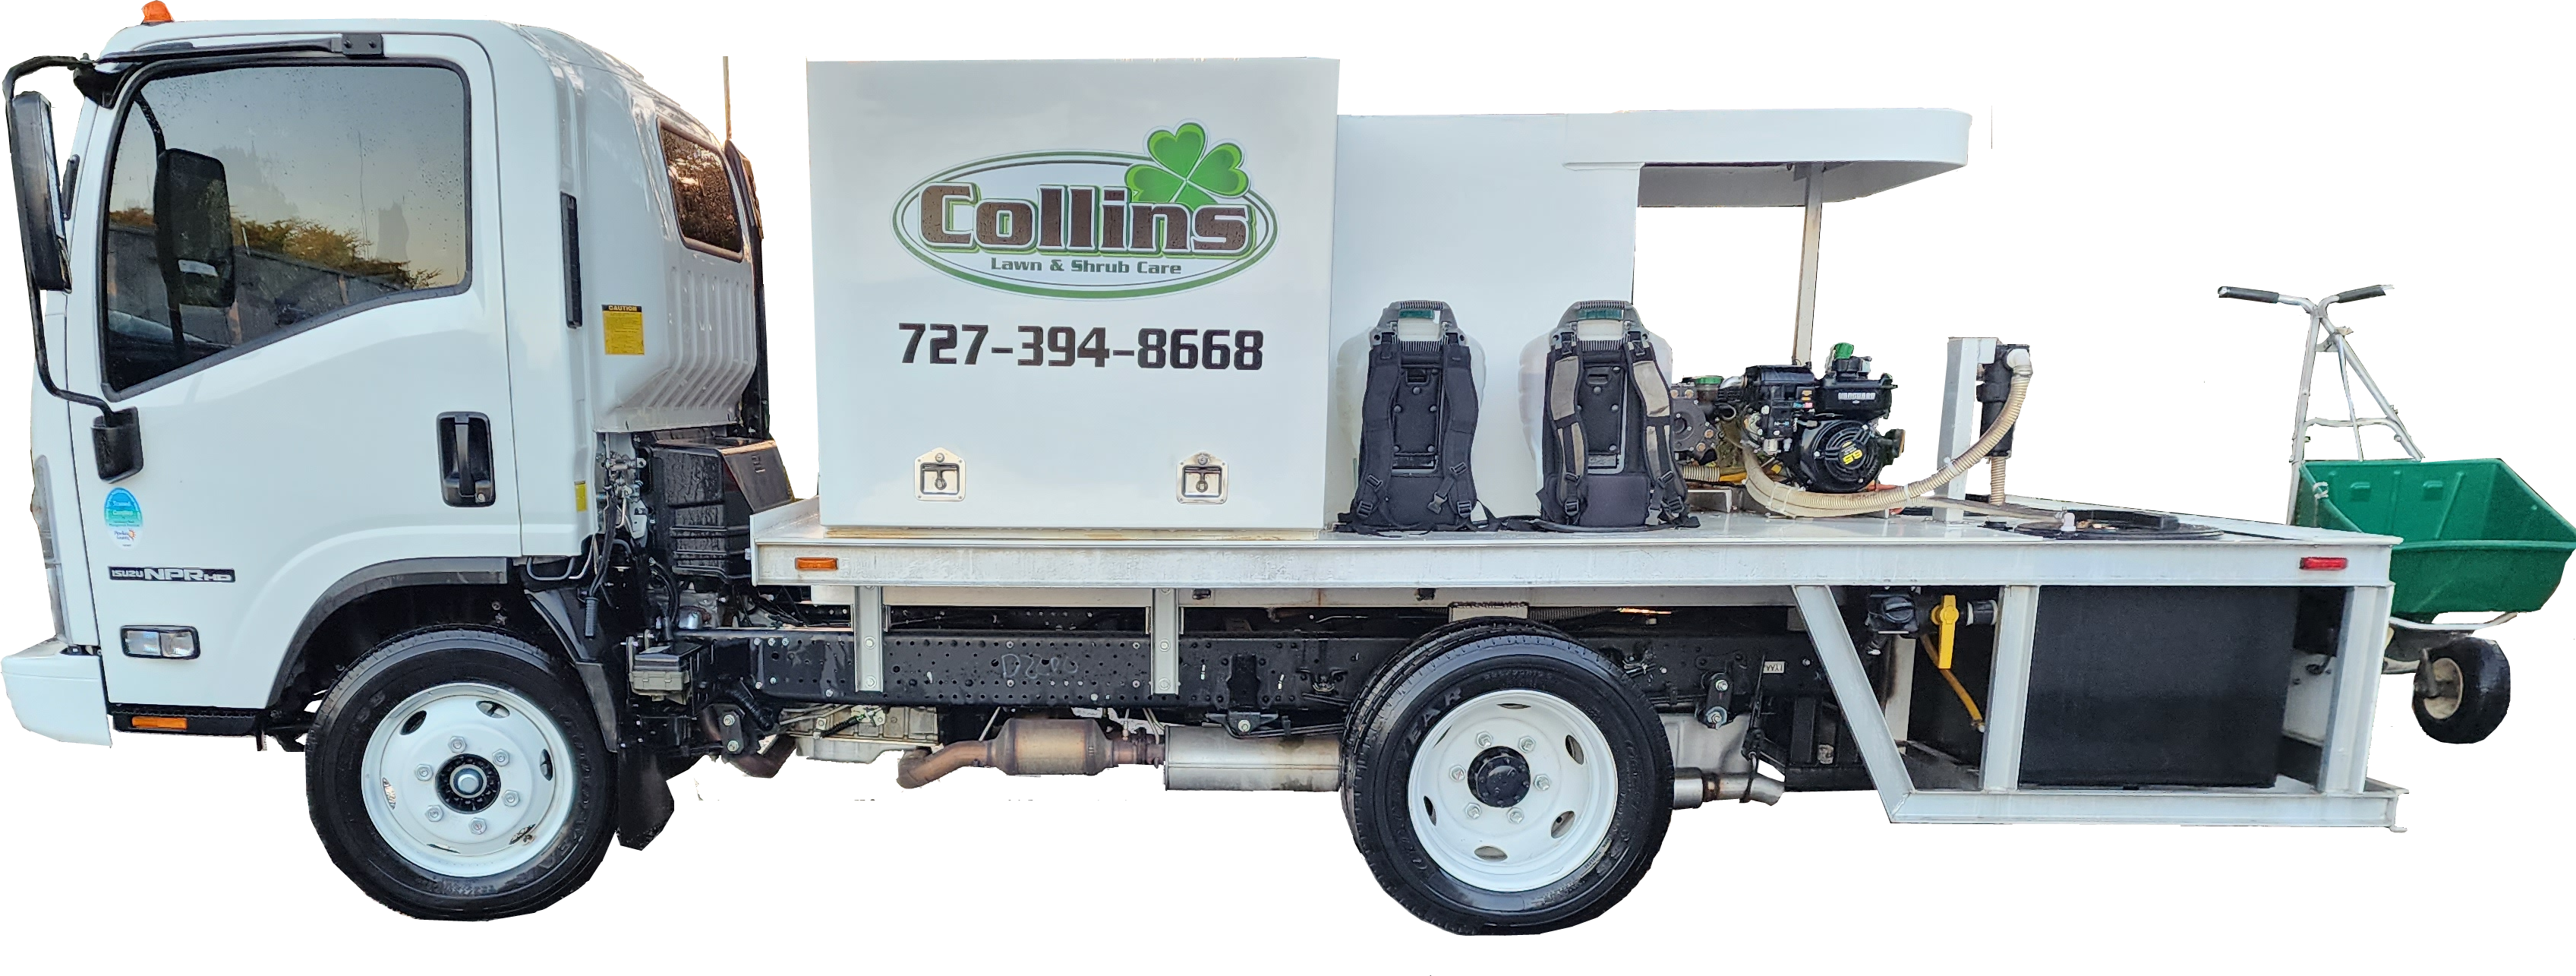 collins lawn care and tree care services truck